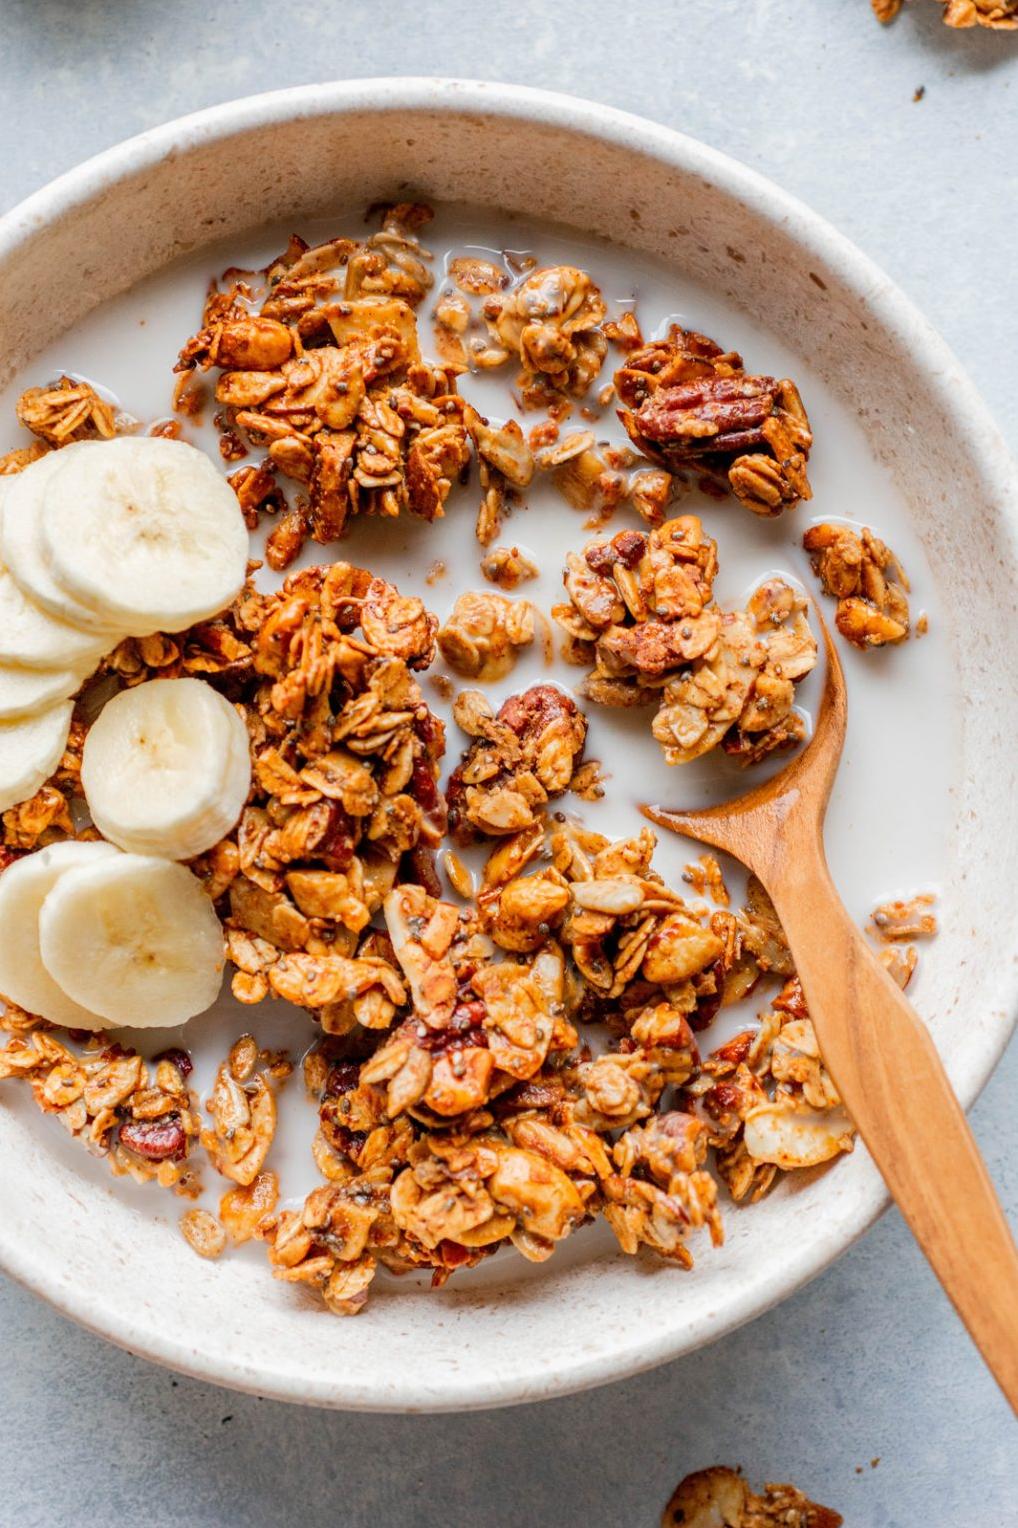  This granola is loaded with healthy nuts, seeds, and dried fruit for a satisfying breakfast.